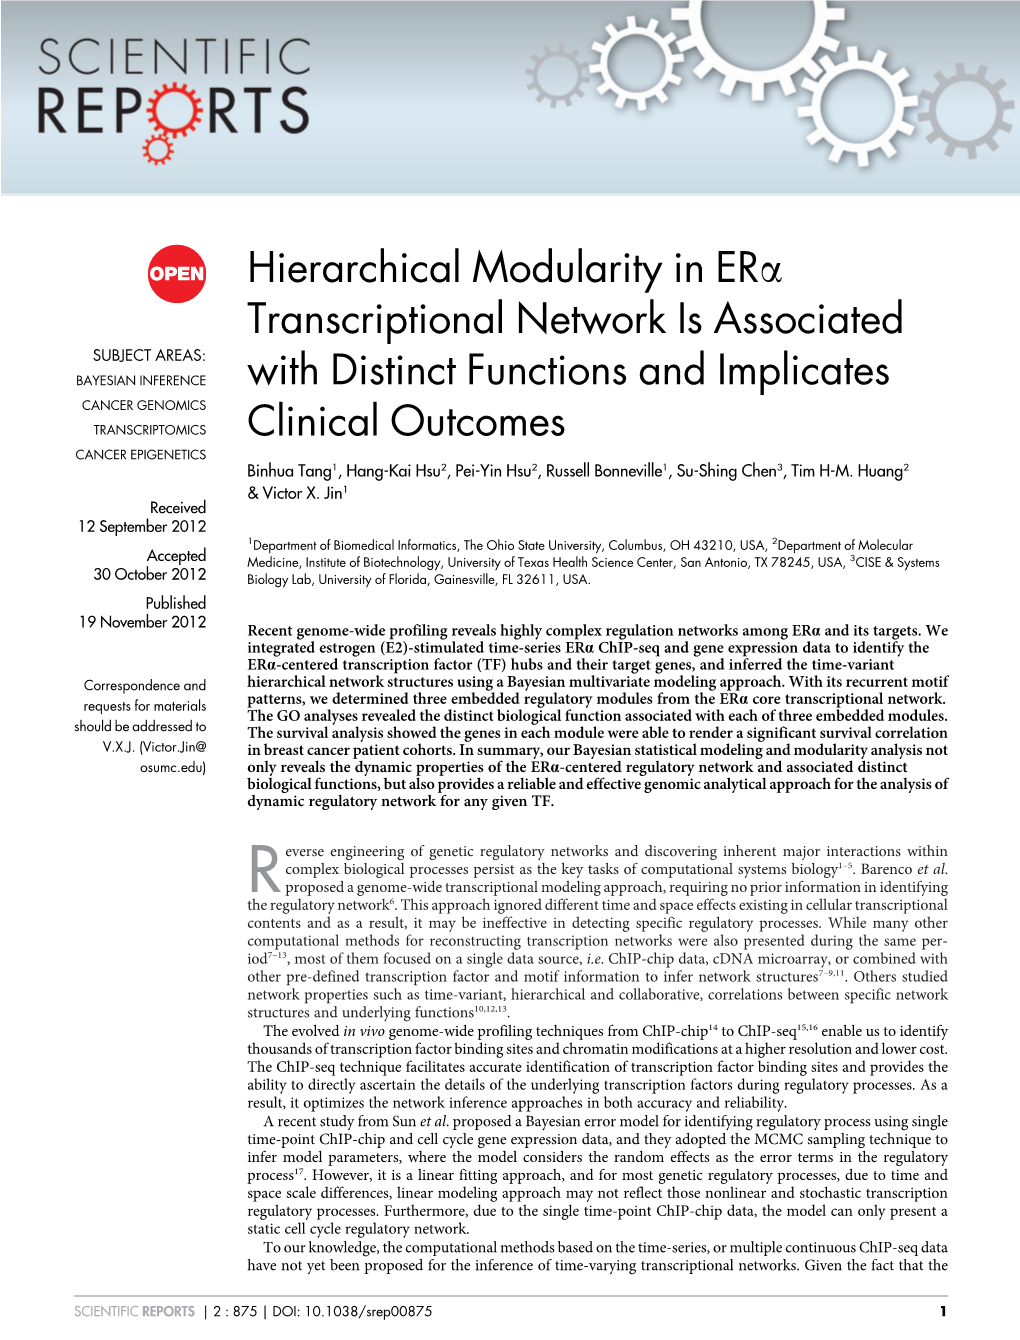 Hierarchical Modularity in Era Transcriptional Network Is